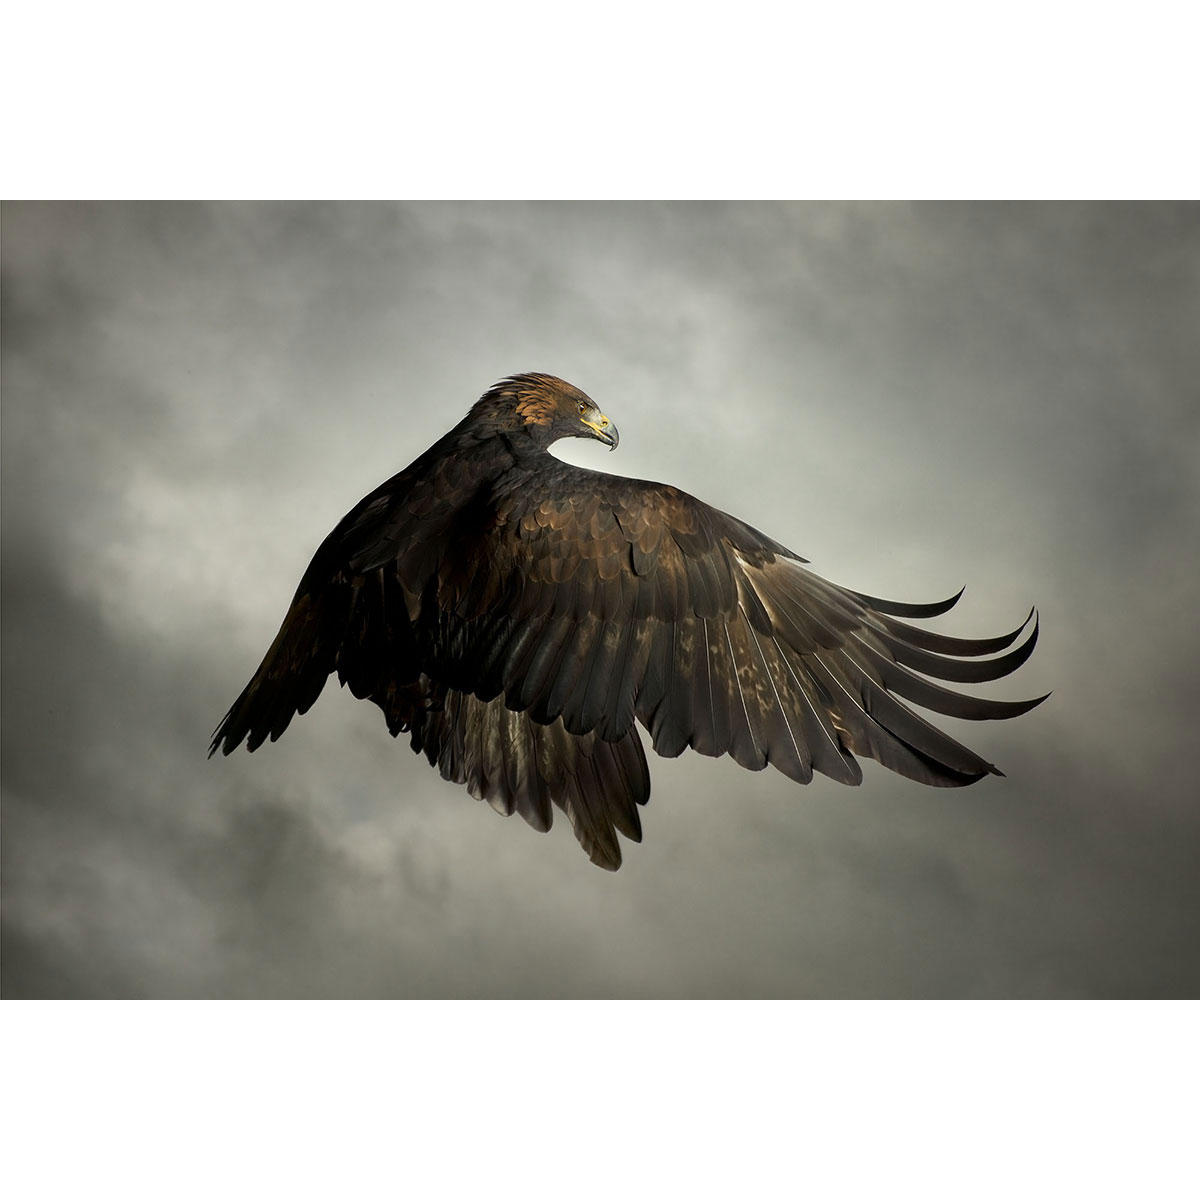 Mark-Harvey-photography_In-Flight-collection-GOLDEN-EAGLE_lowres